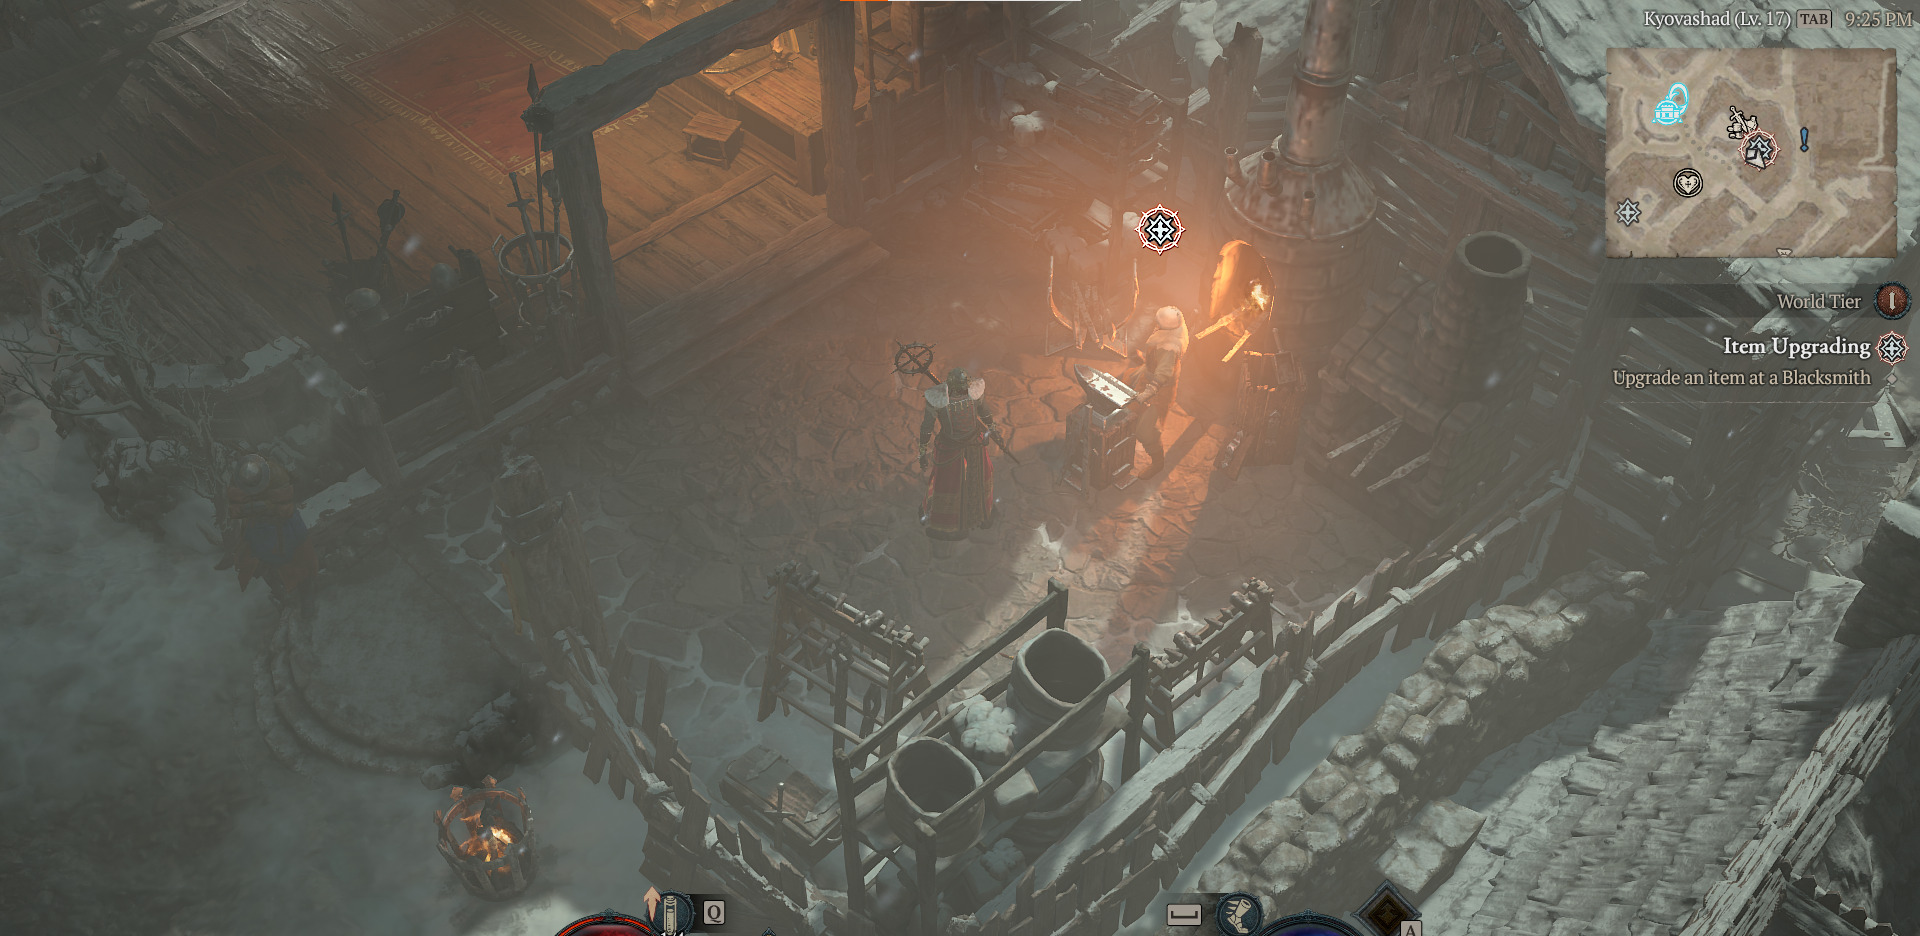 A screenshot showing where to find the blacksmith in Diablo 4